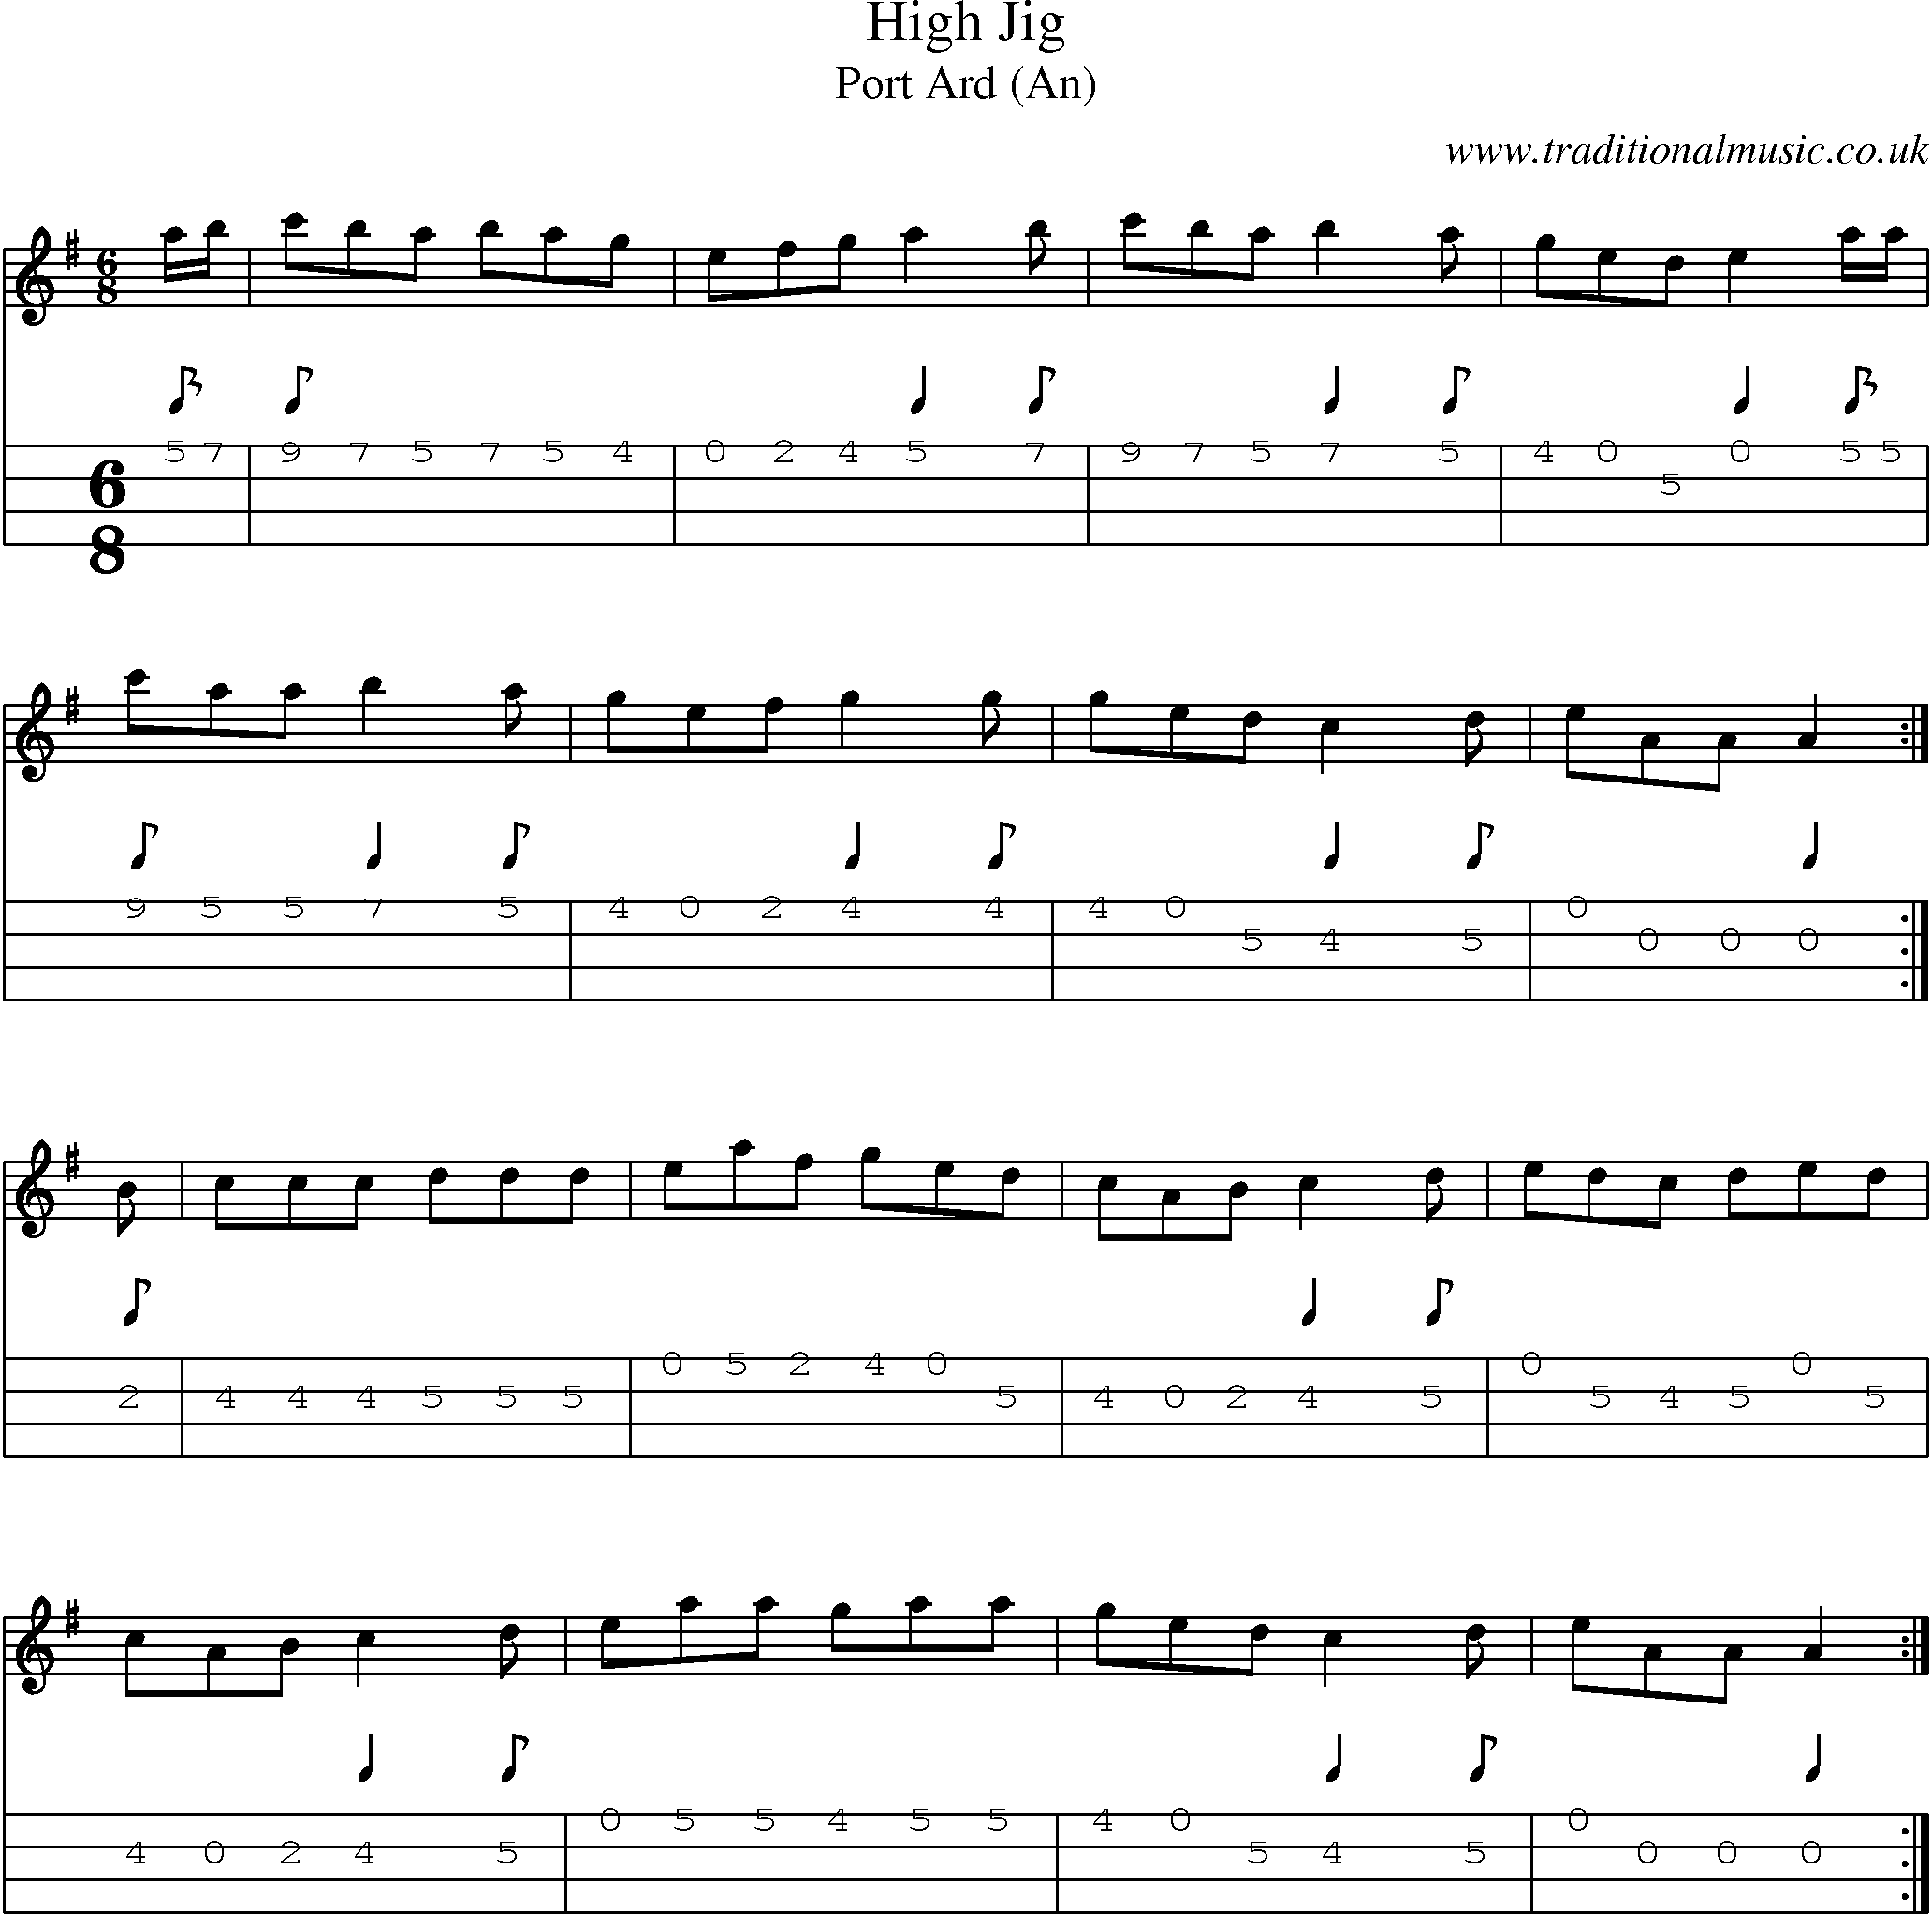 Music Score and Mandolin Tabs for High Jig